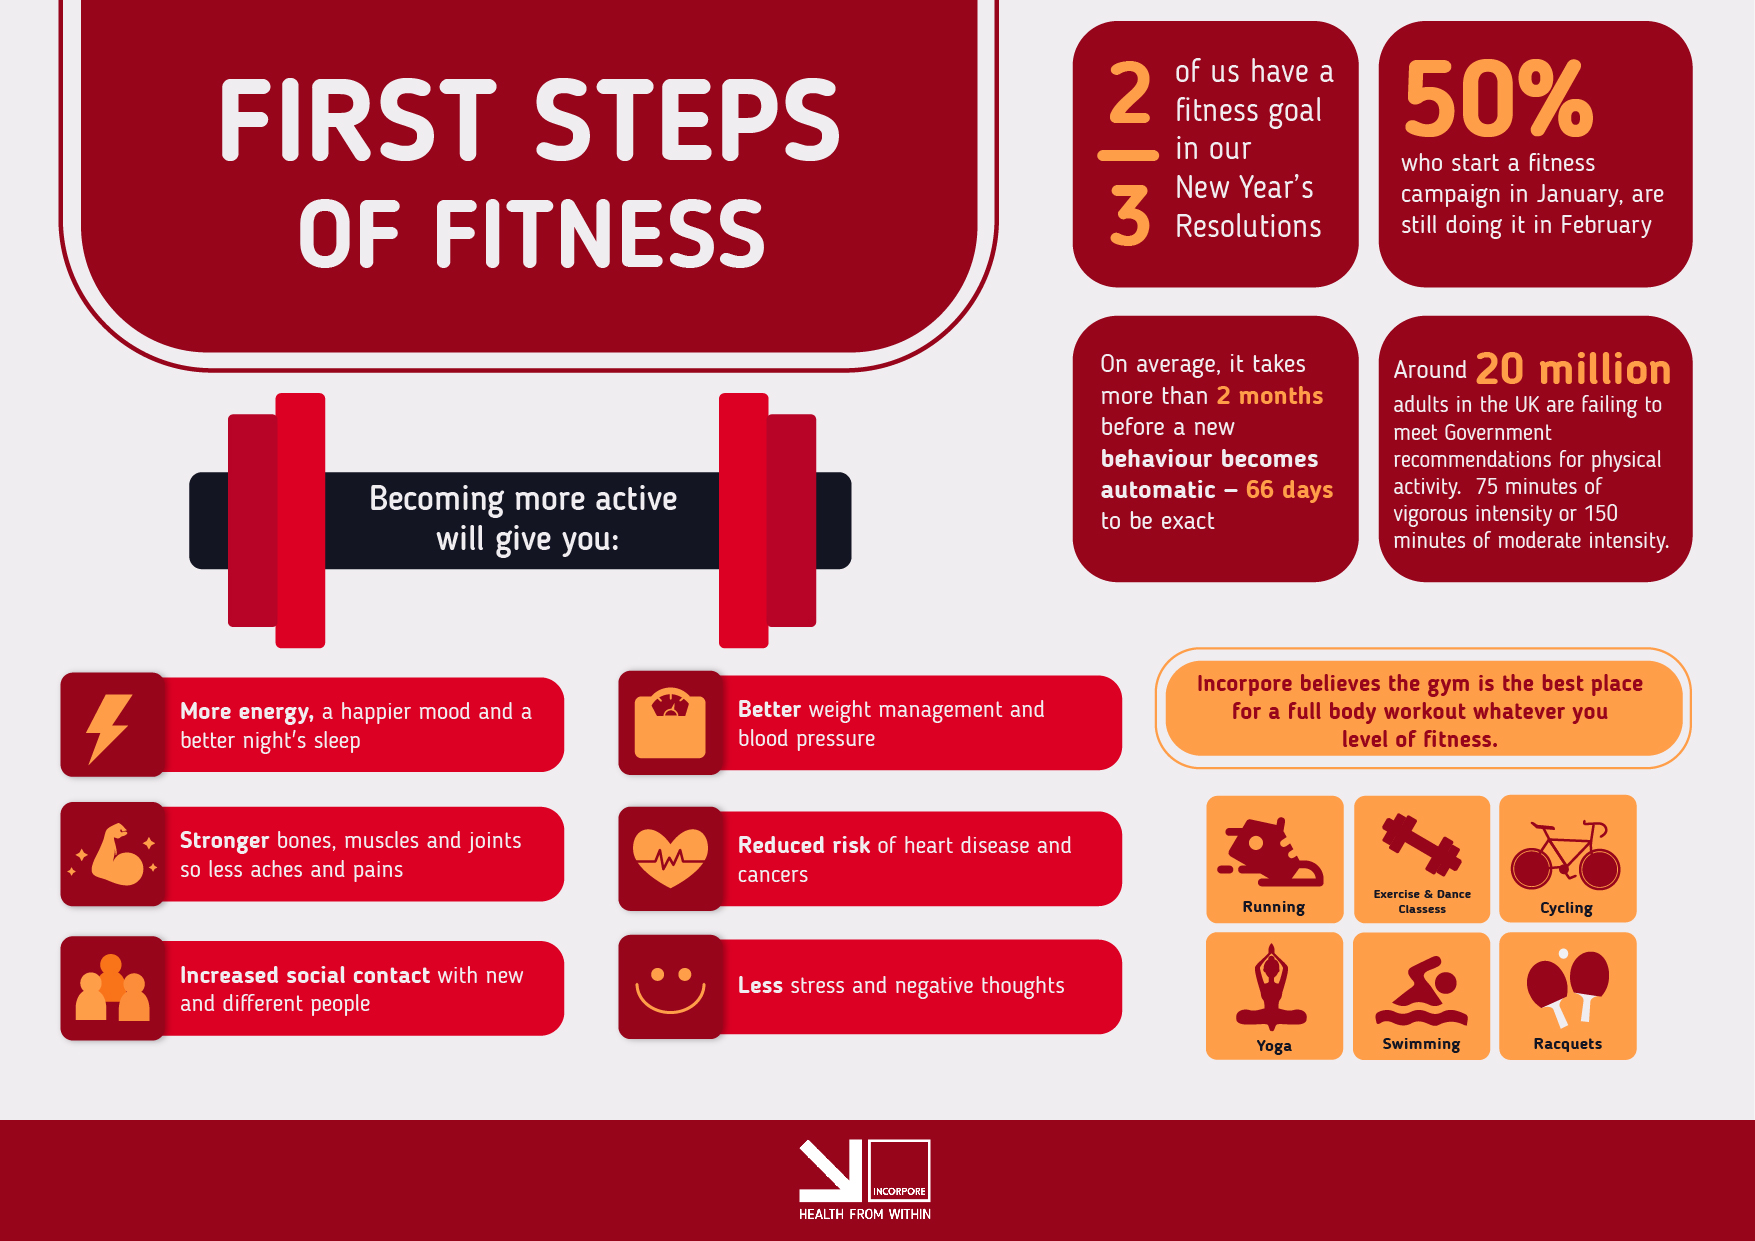 How to Start a Fitness Journey in 4 Easy Steps